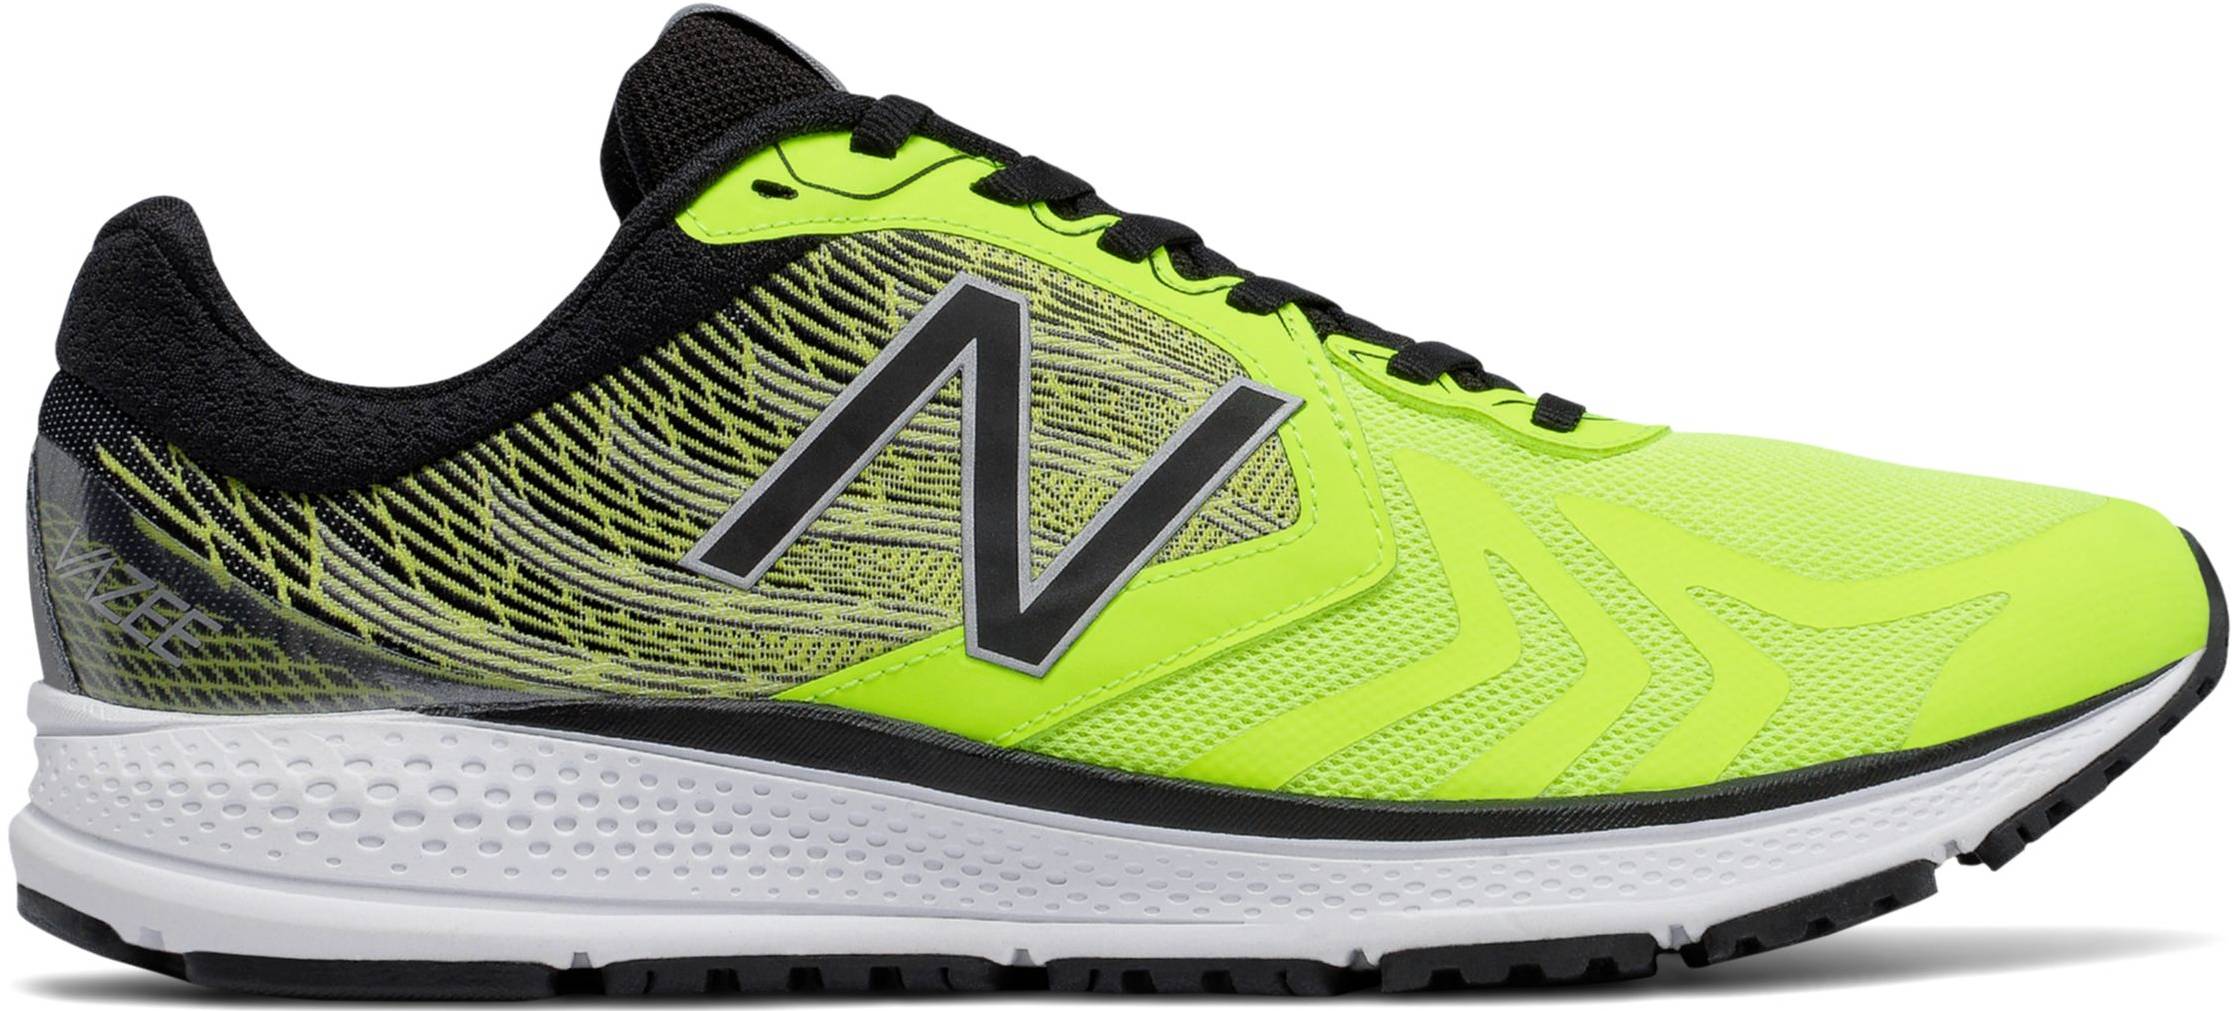 New Balance Vazee Pace v2 - Deals (£71), Facts, Reviews (2021 ...